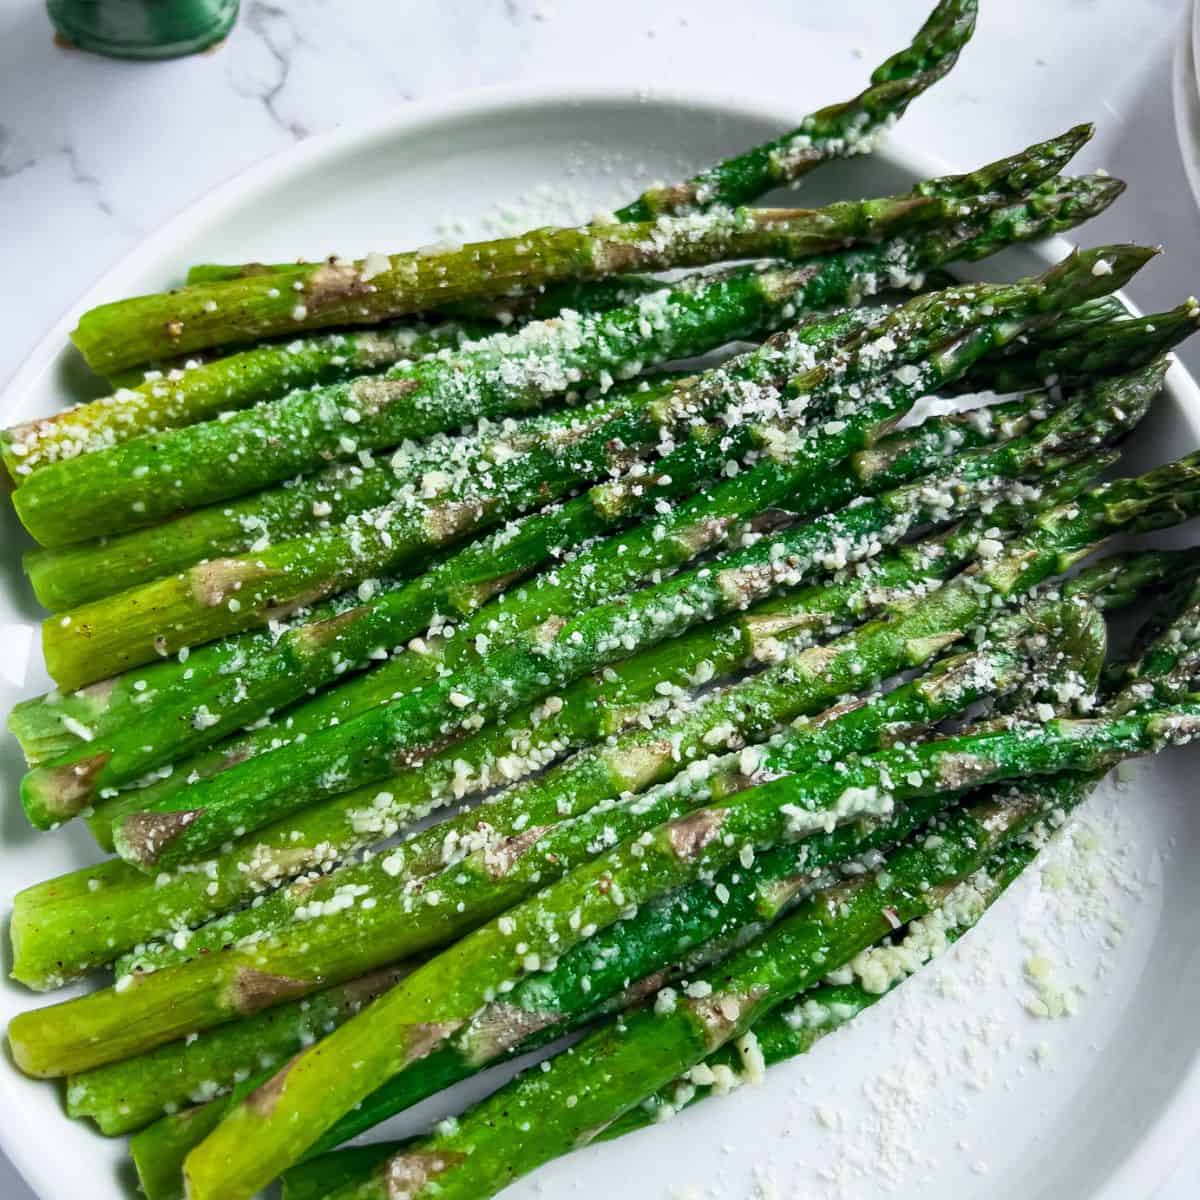 Finish dish of Air-fryer Roasted Asparagus with parmesan cheese.